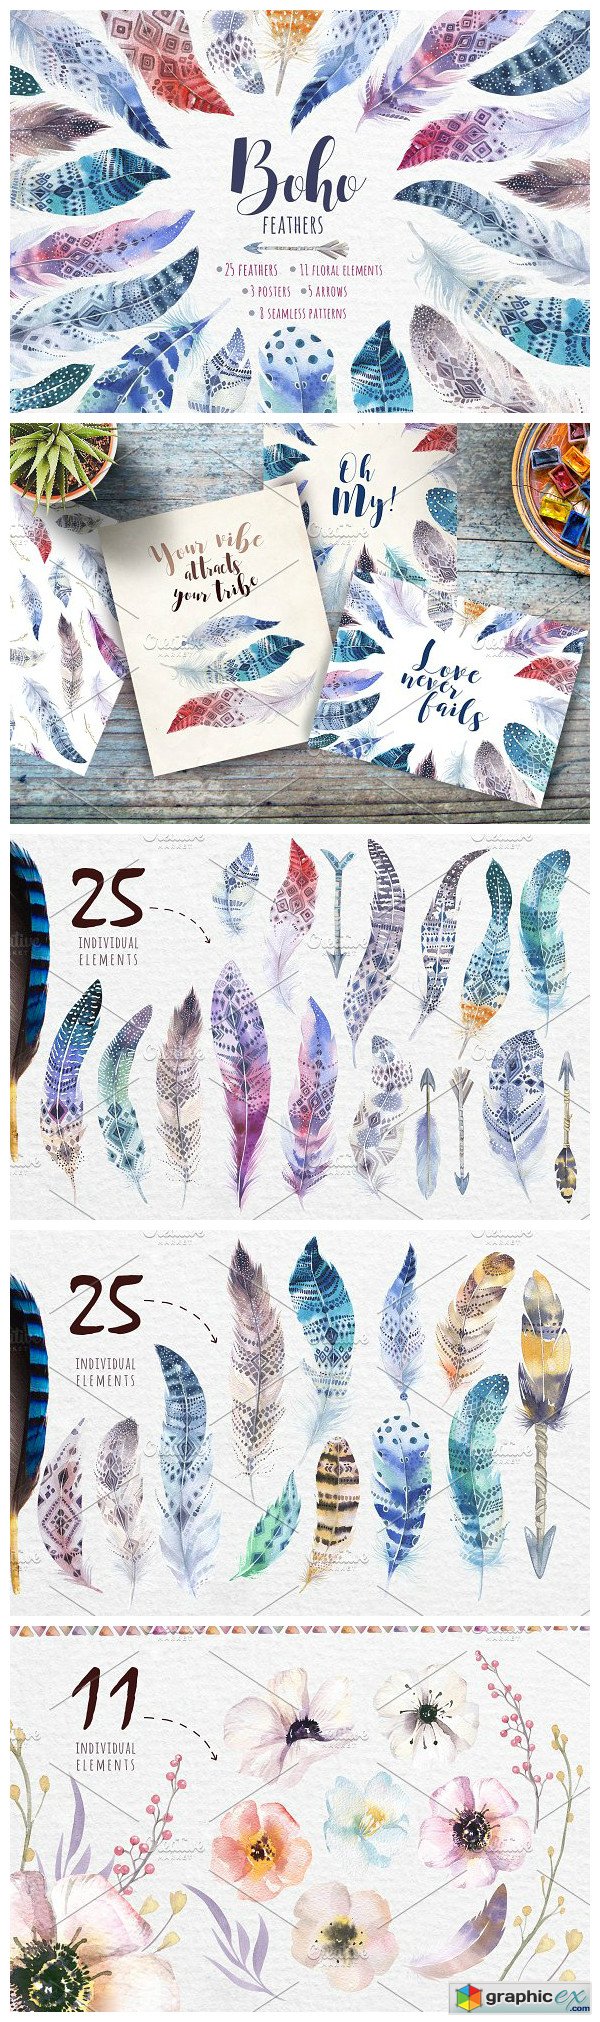 Bohemian watercolor feathers. Tribe